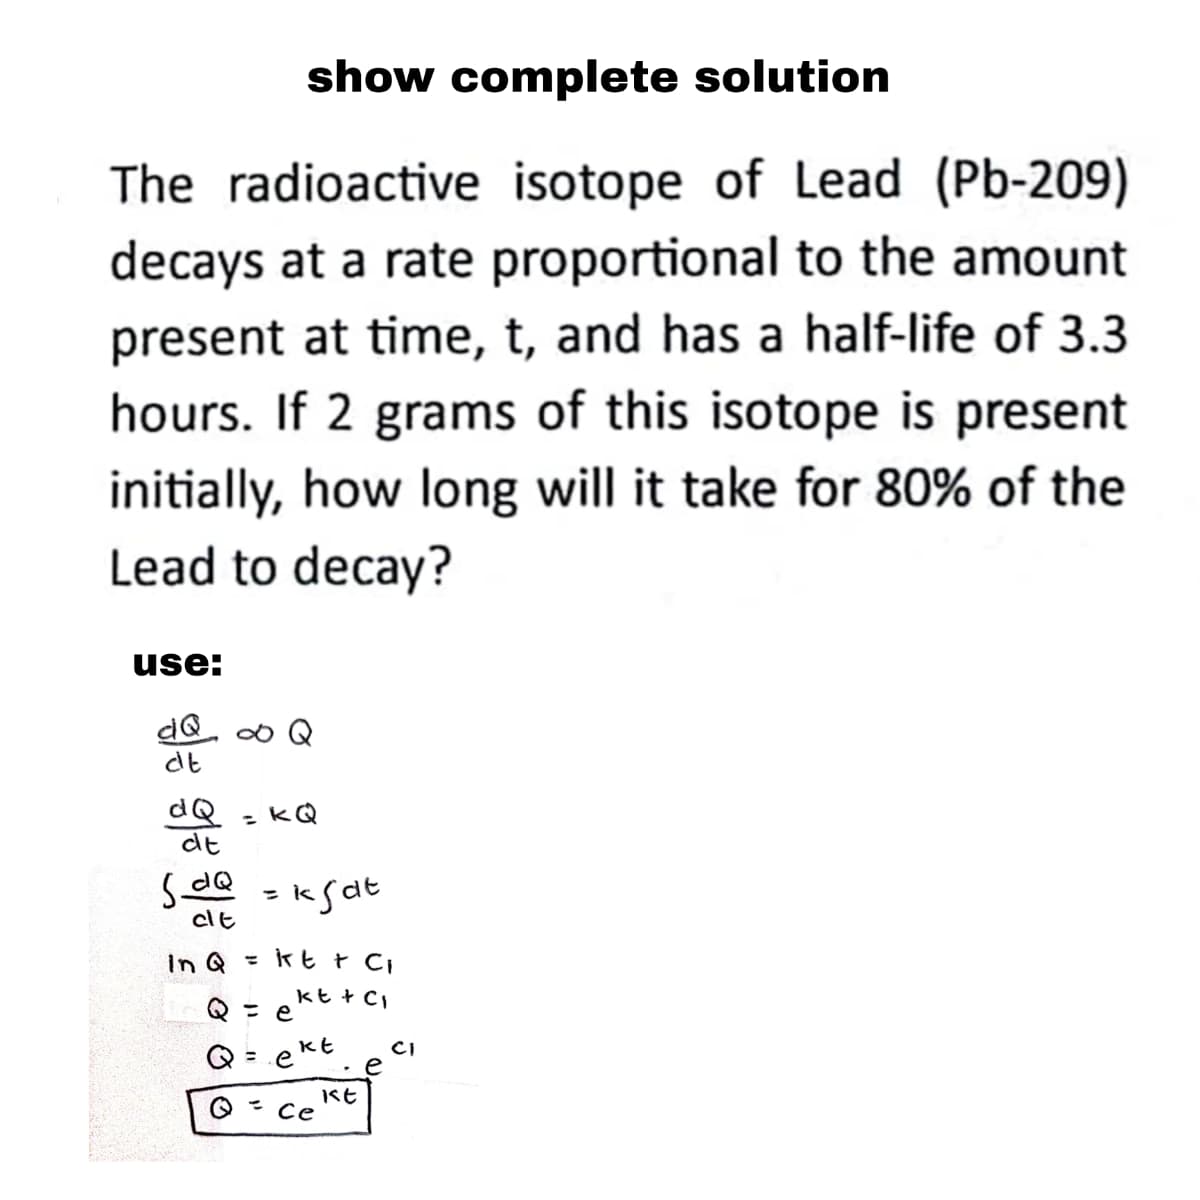 show complete solution
The radioactive isotope of Lead (Pb-209)
decays at a rate proportional to the amount
present at time, t, and has a half-life of 3.3
hours. If 2 grams of this isotope is present
initially, how long will it take for 80% of the
Lead to decay?
use:
dQ ∞ Q
dt
dQ
dt
= KQ
SdQ = kgat
cit
In Q = kt + C₁
Q = ekt +c₁
Q = ekt
Q = ce
kt
CI